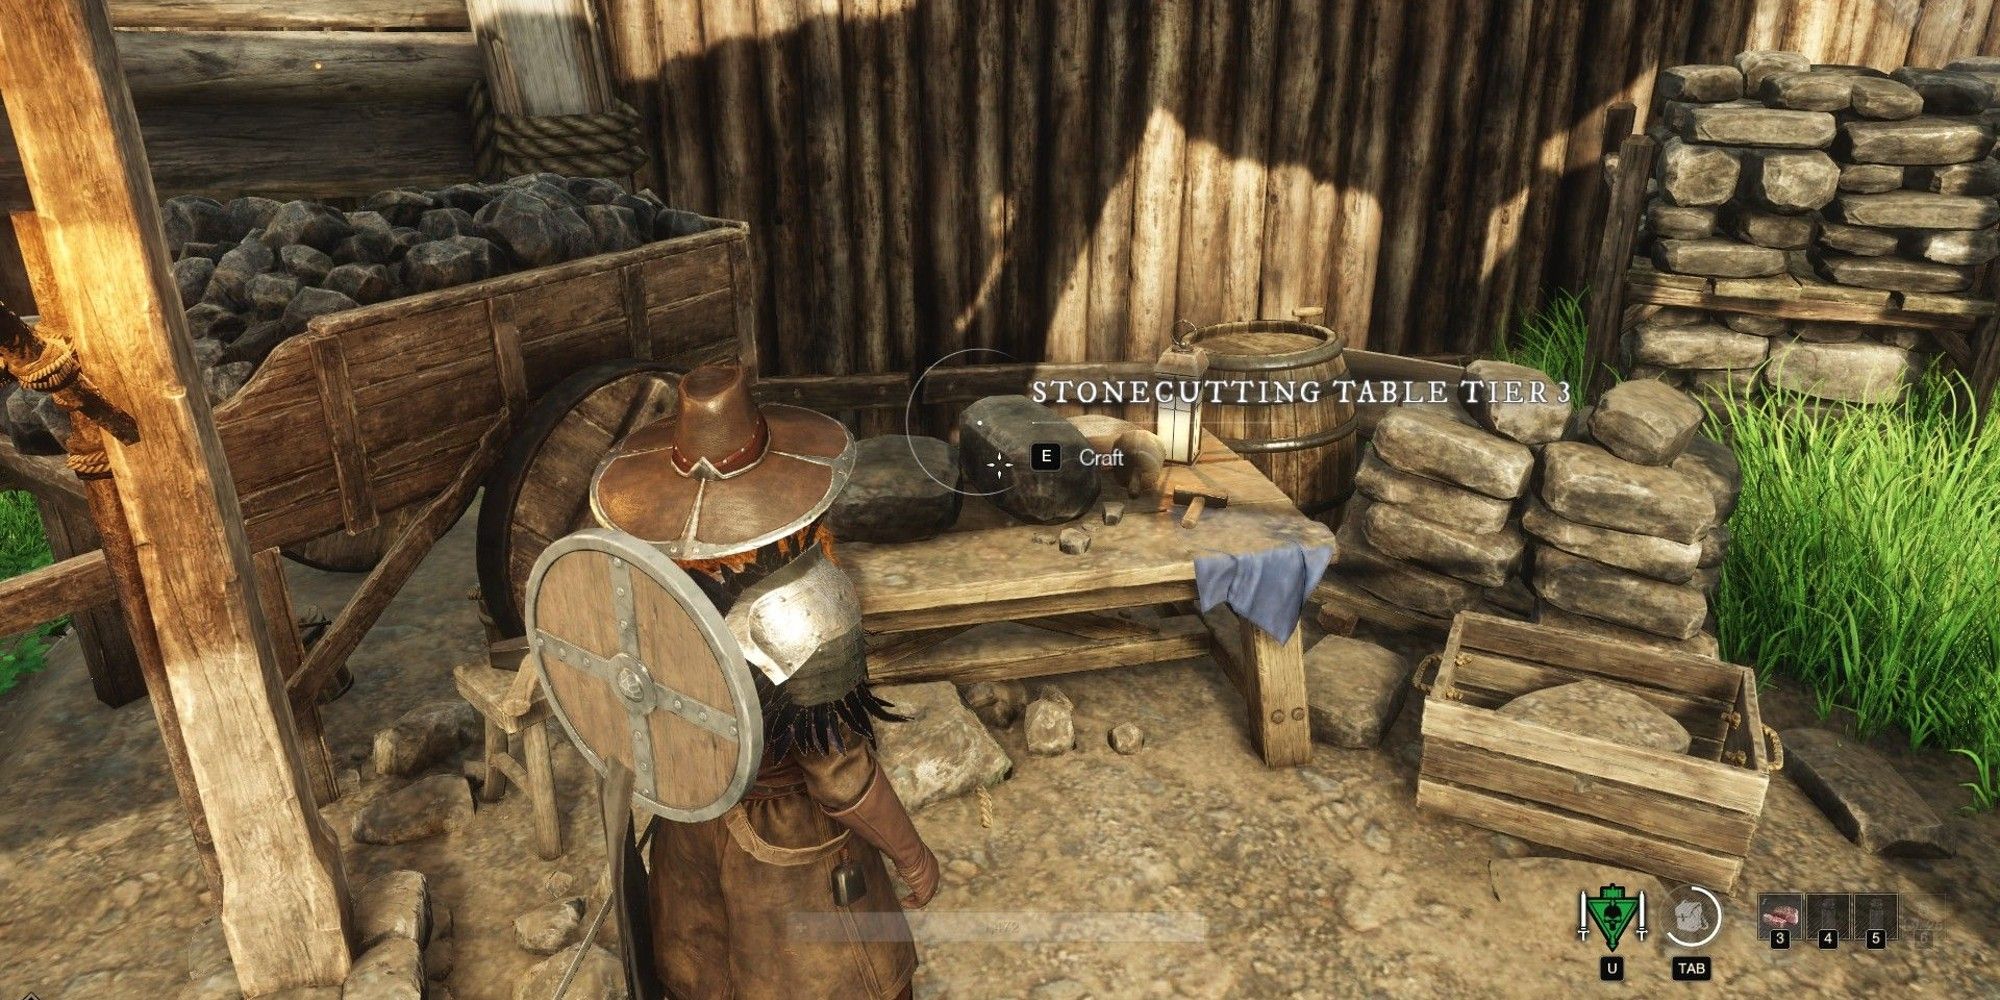 A player uses a Stonecutting table in a settlement in New World